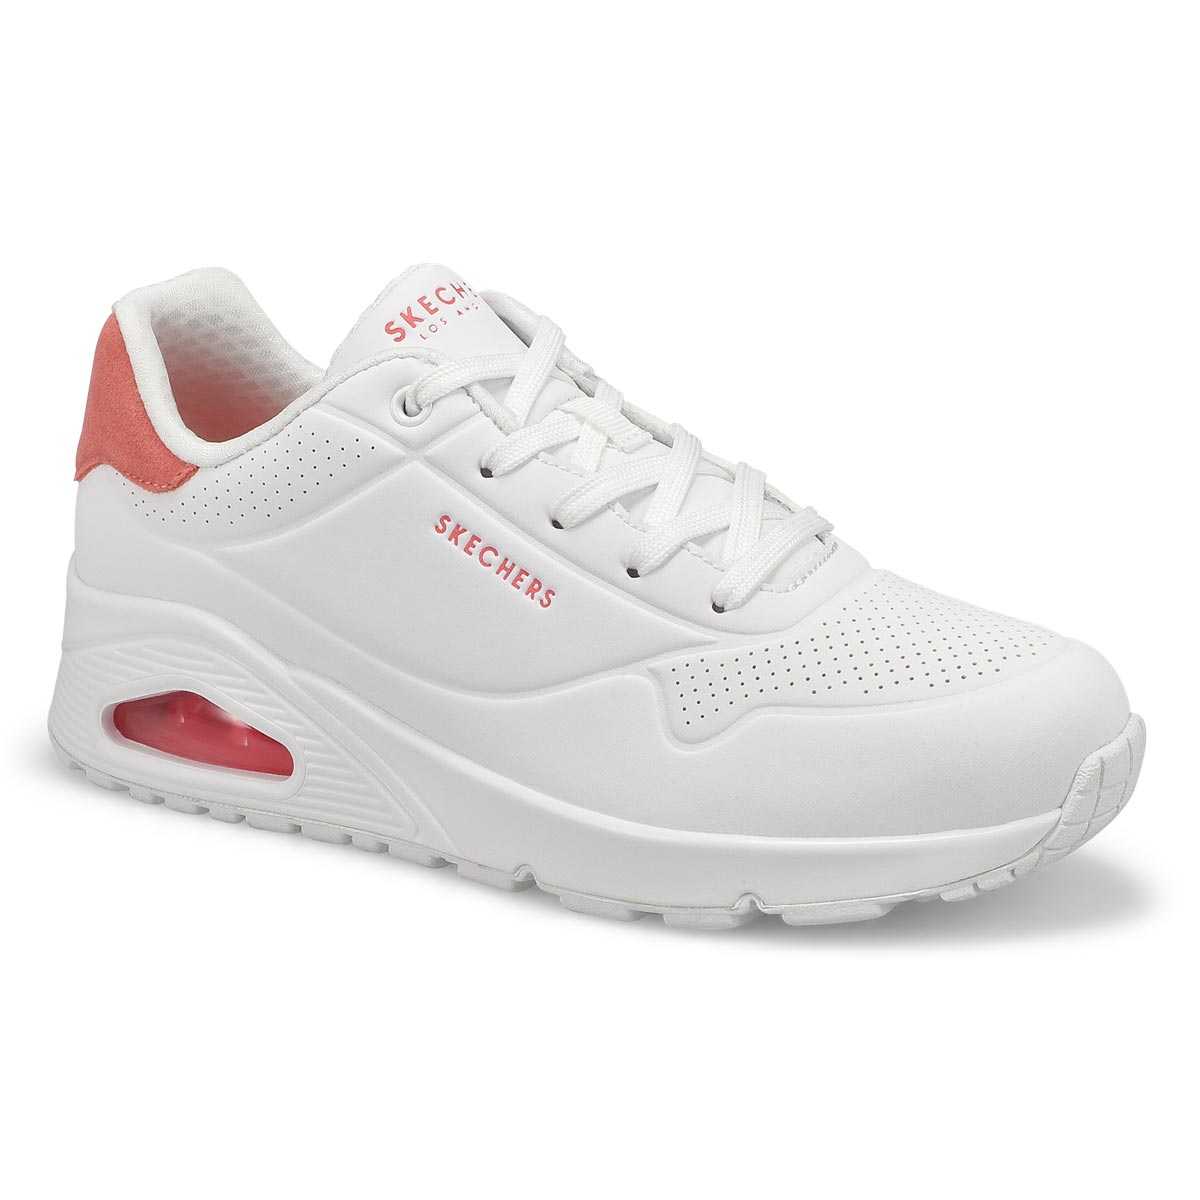 Women's  Uno Pop Back Lace Up Sneaker - White/Coral